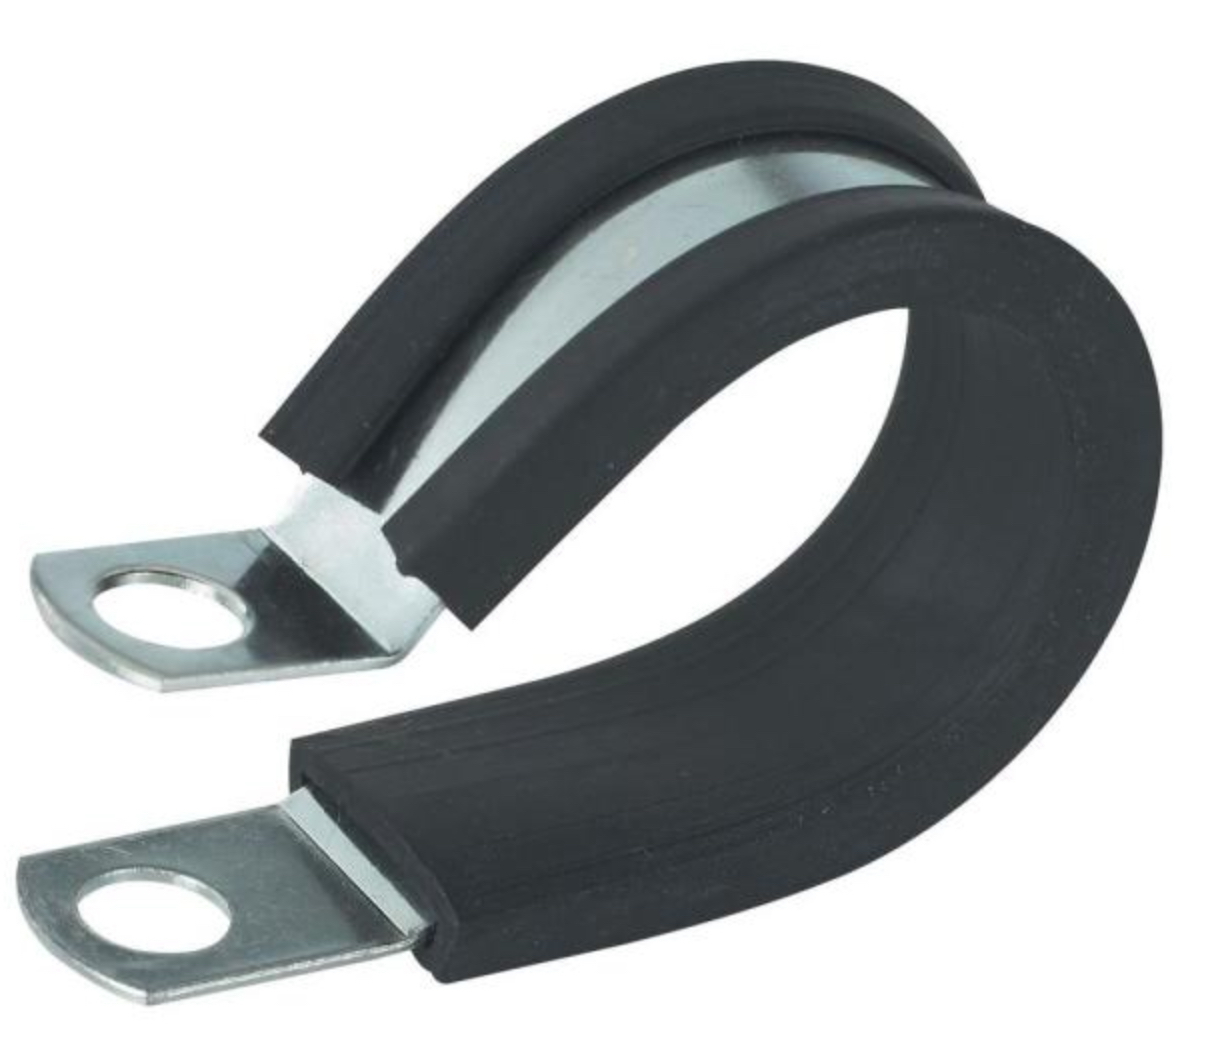 Gardner Bender 3/8 in. Rubber-Insulated Metal Clamps (2-Pack)  - $3.95